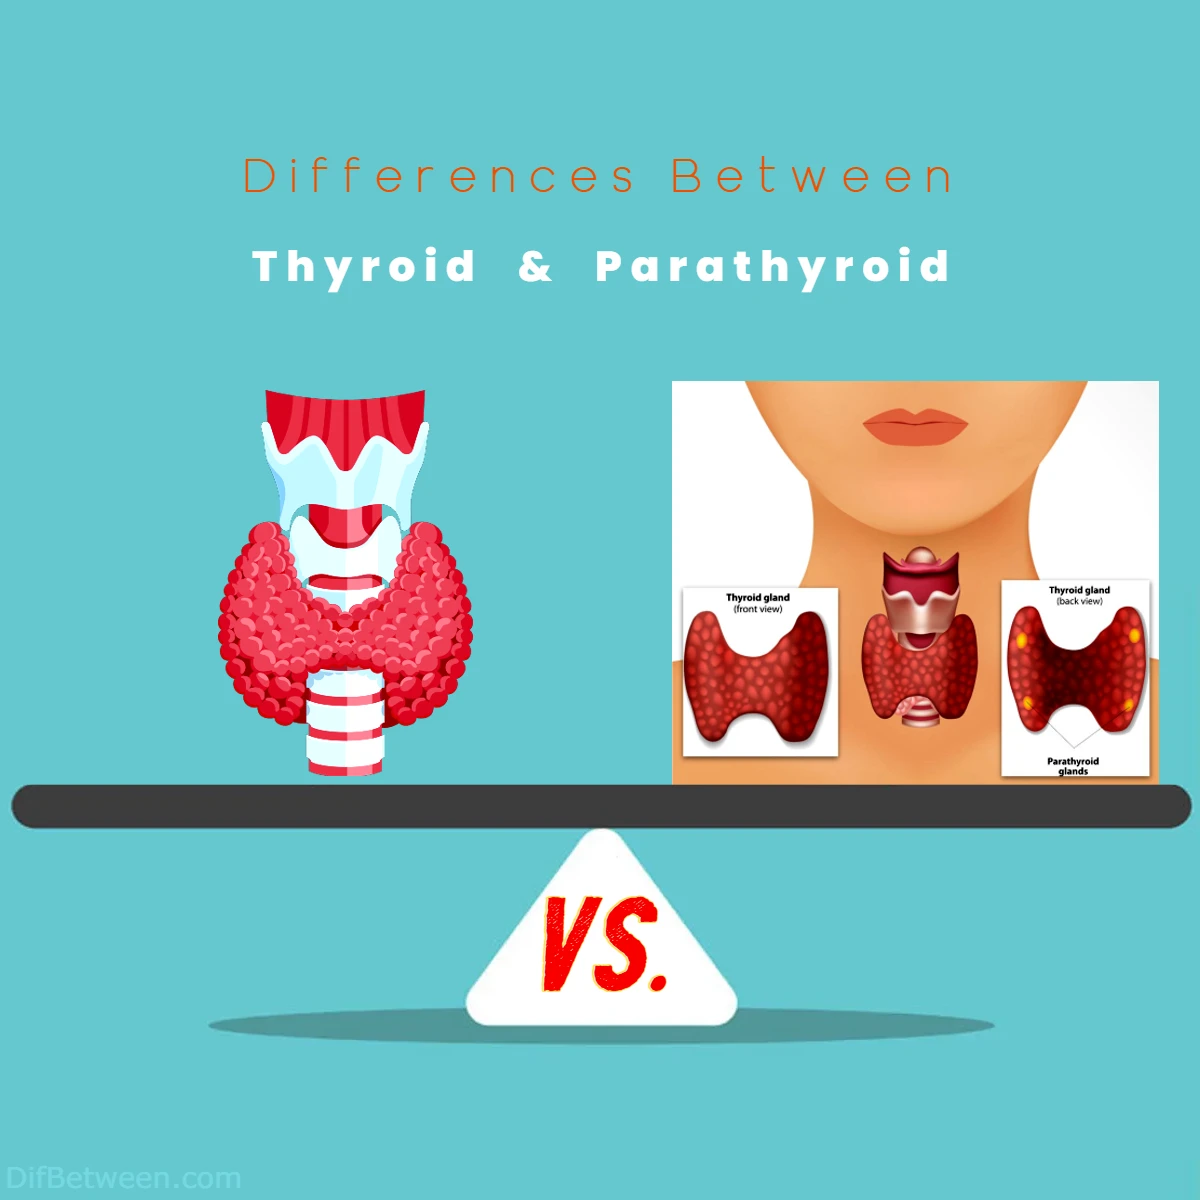 Differences Between Thyroid vs Parathyroid